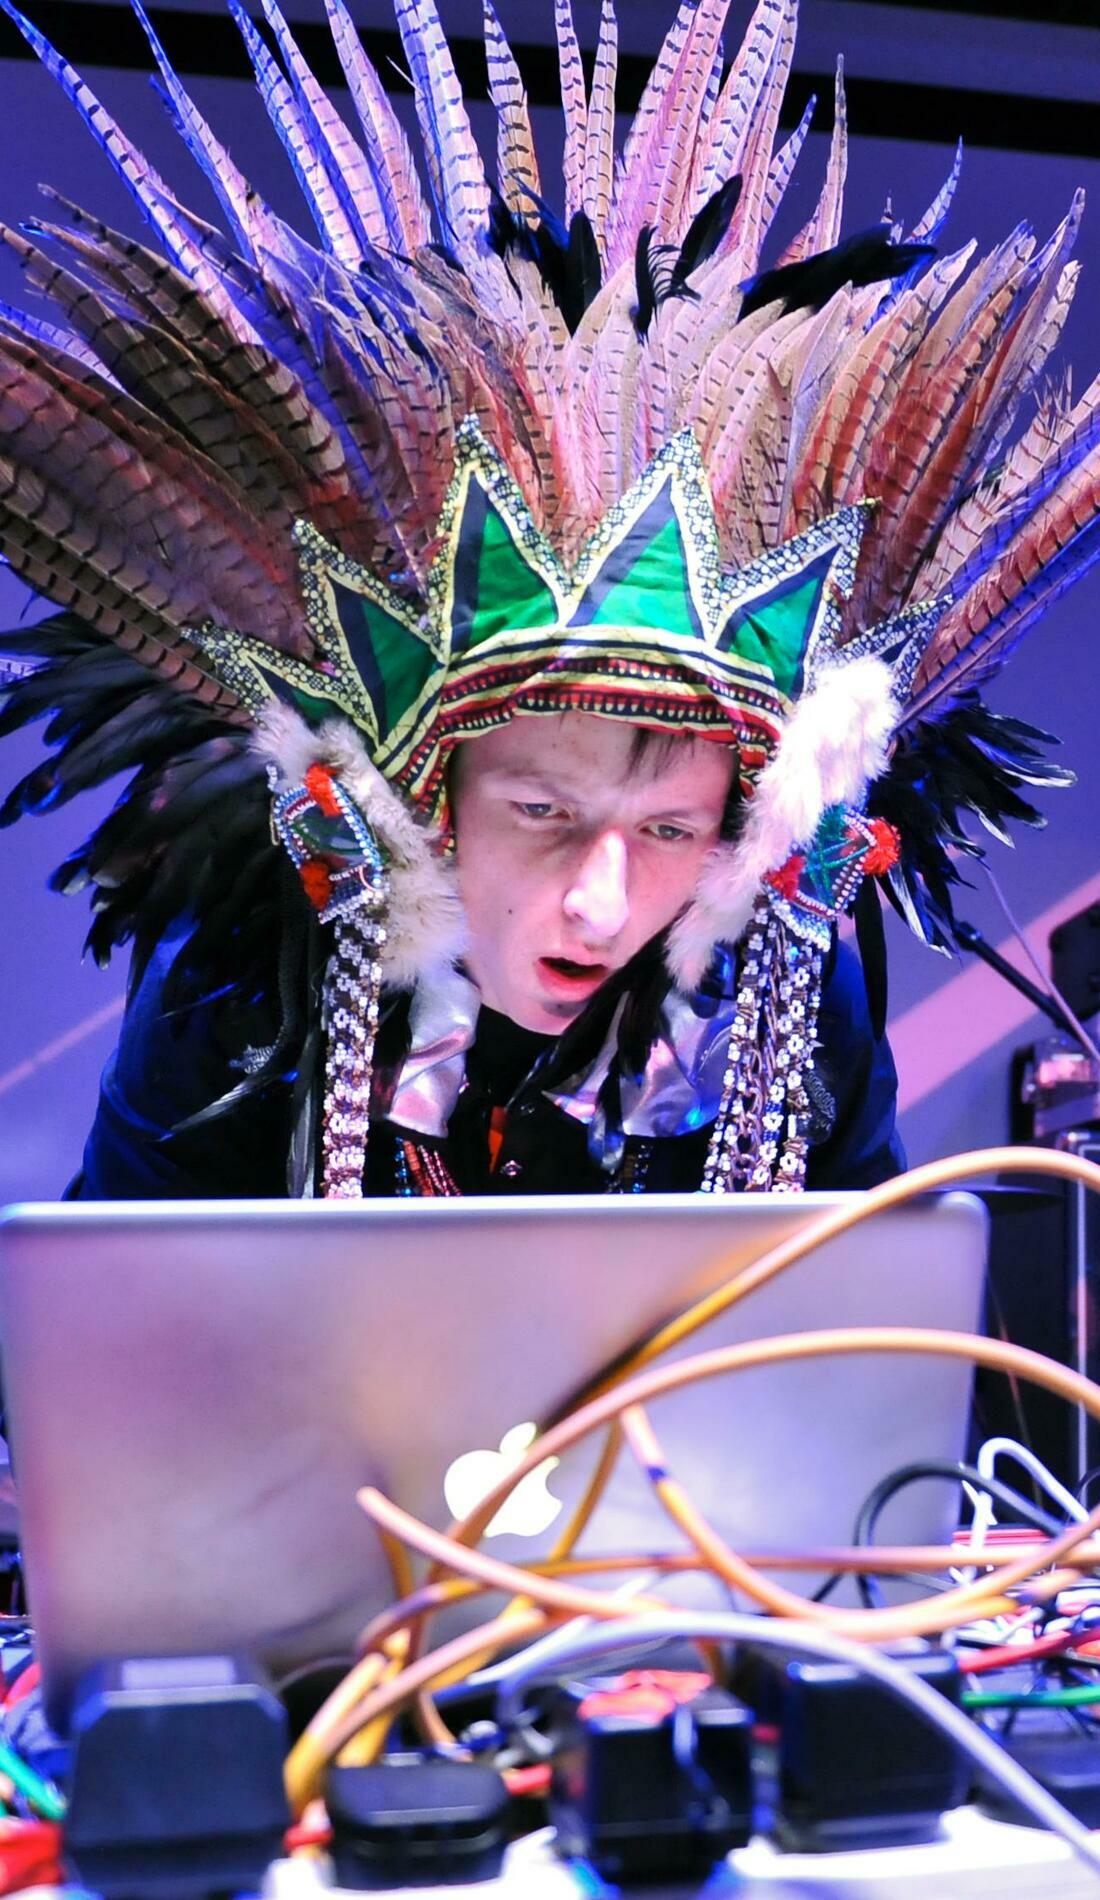 A Totally Enormous Extinct Dinosaurs live event